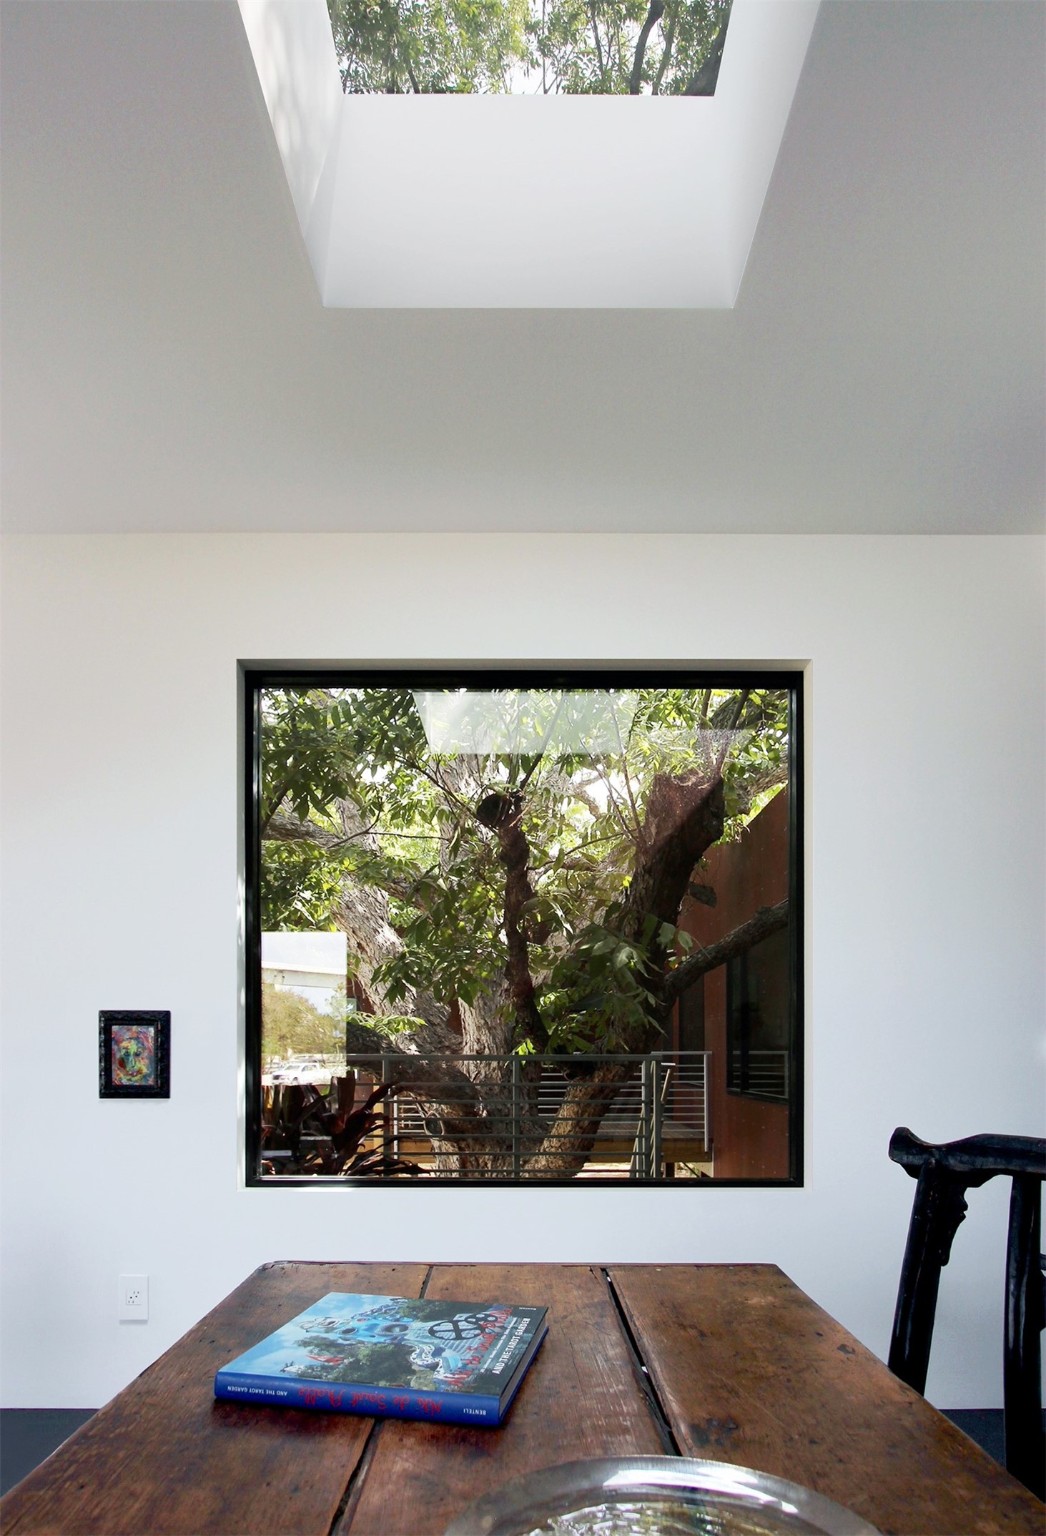 The tree is the focal point for the dining area, arching overhead and seen through a large skylight above.